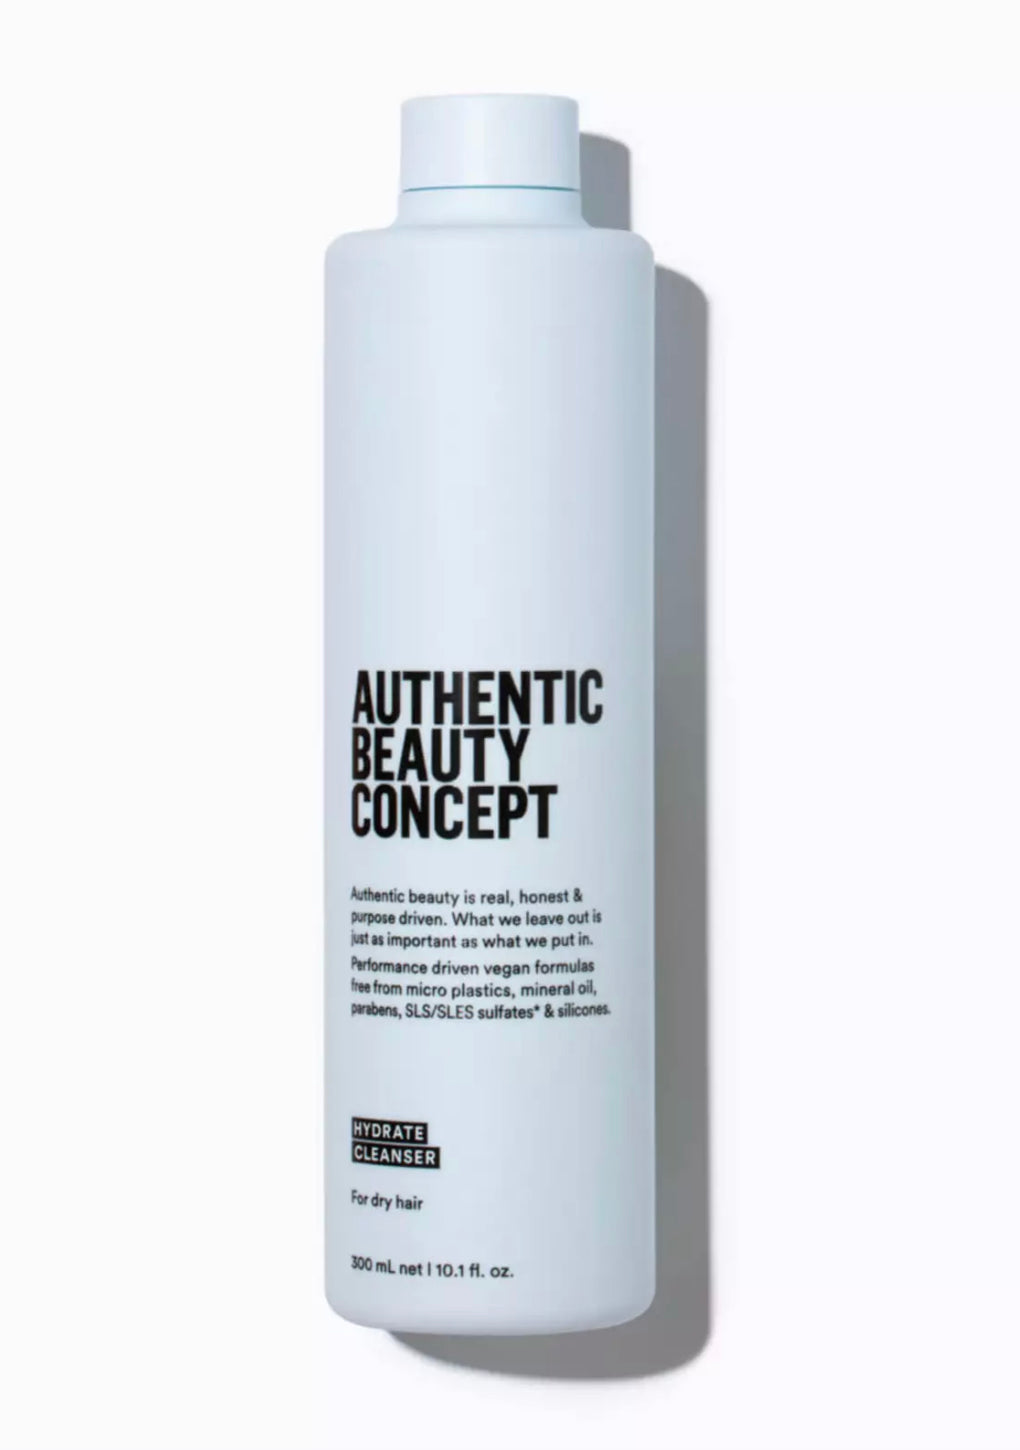 Authentic Beauty Concept hydrate cleanser